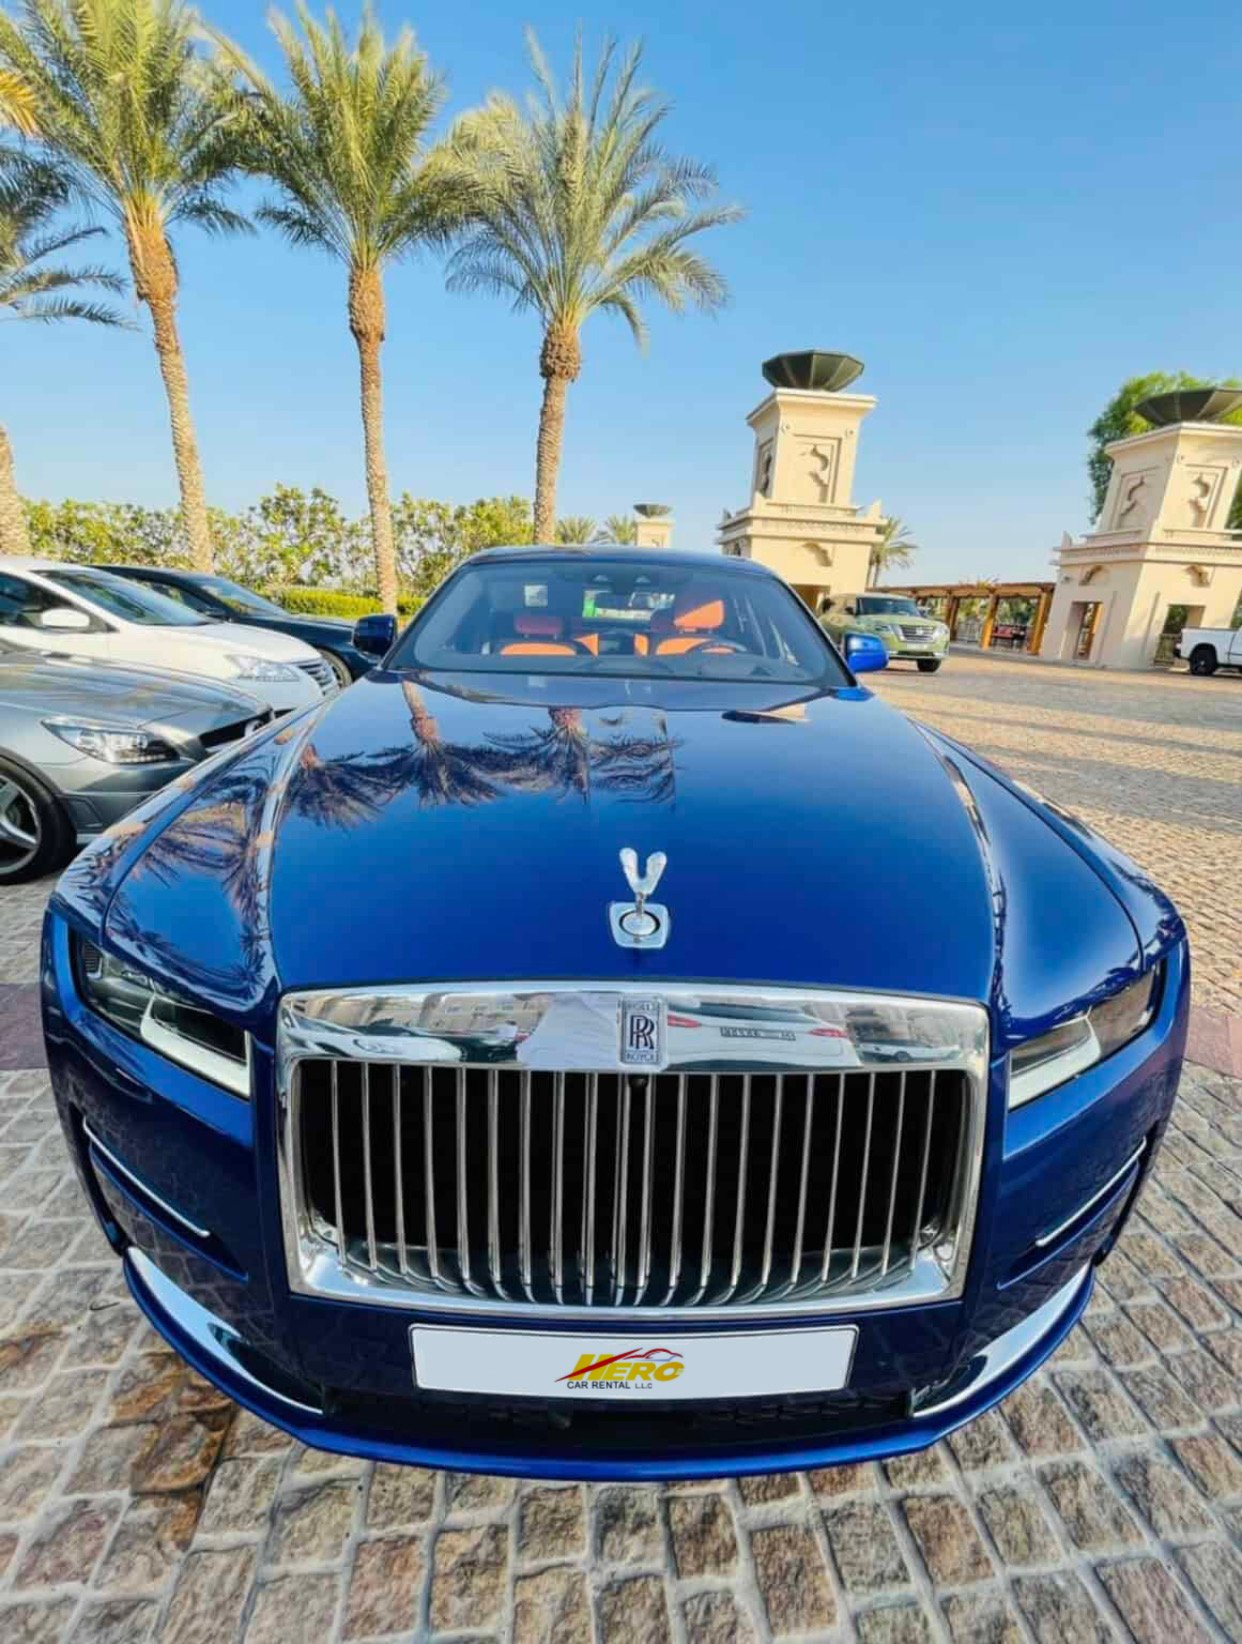 Manchester City star Yaya Toure adds SECOND 300000 Rolls Royce to his  supercar collection  Irish Mirror Online